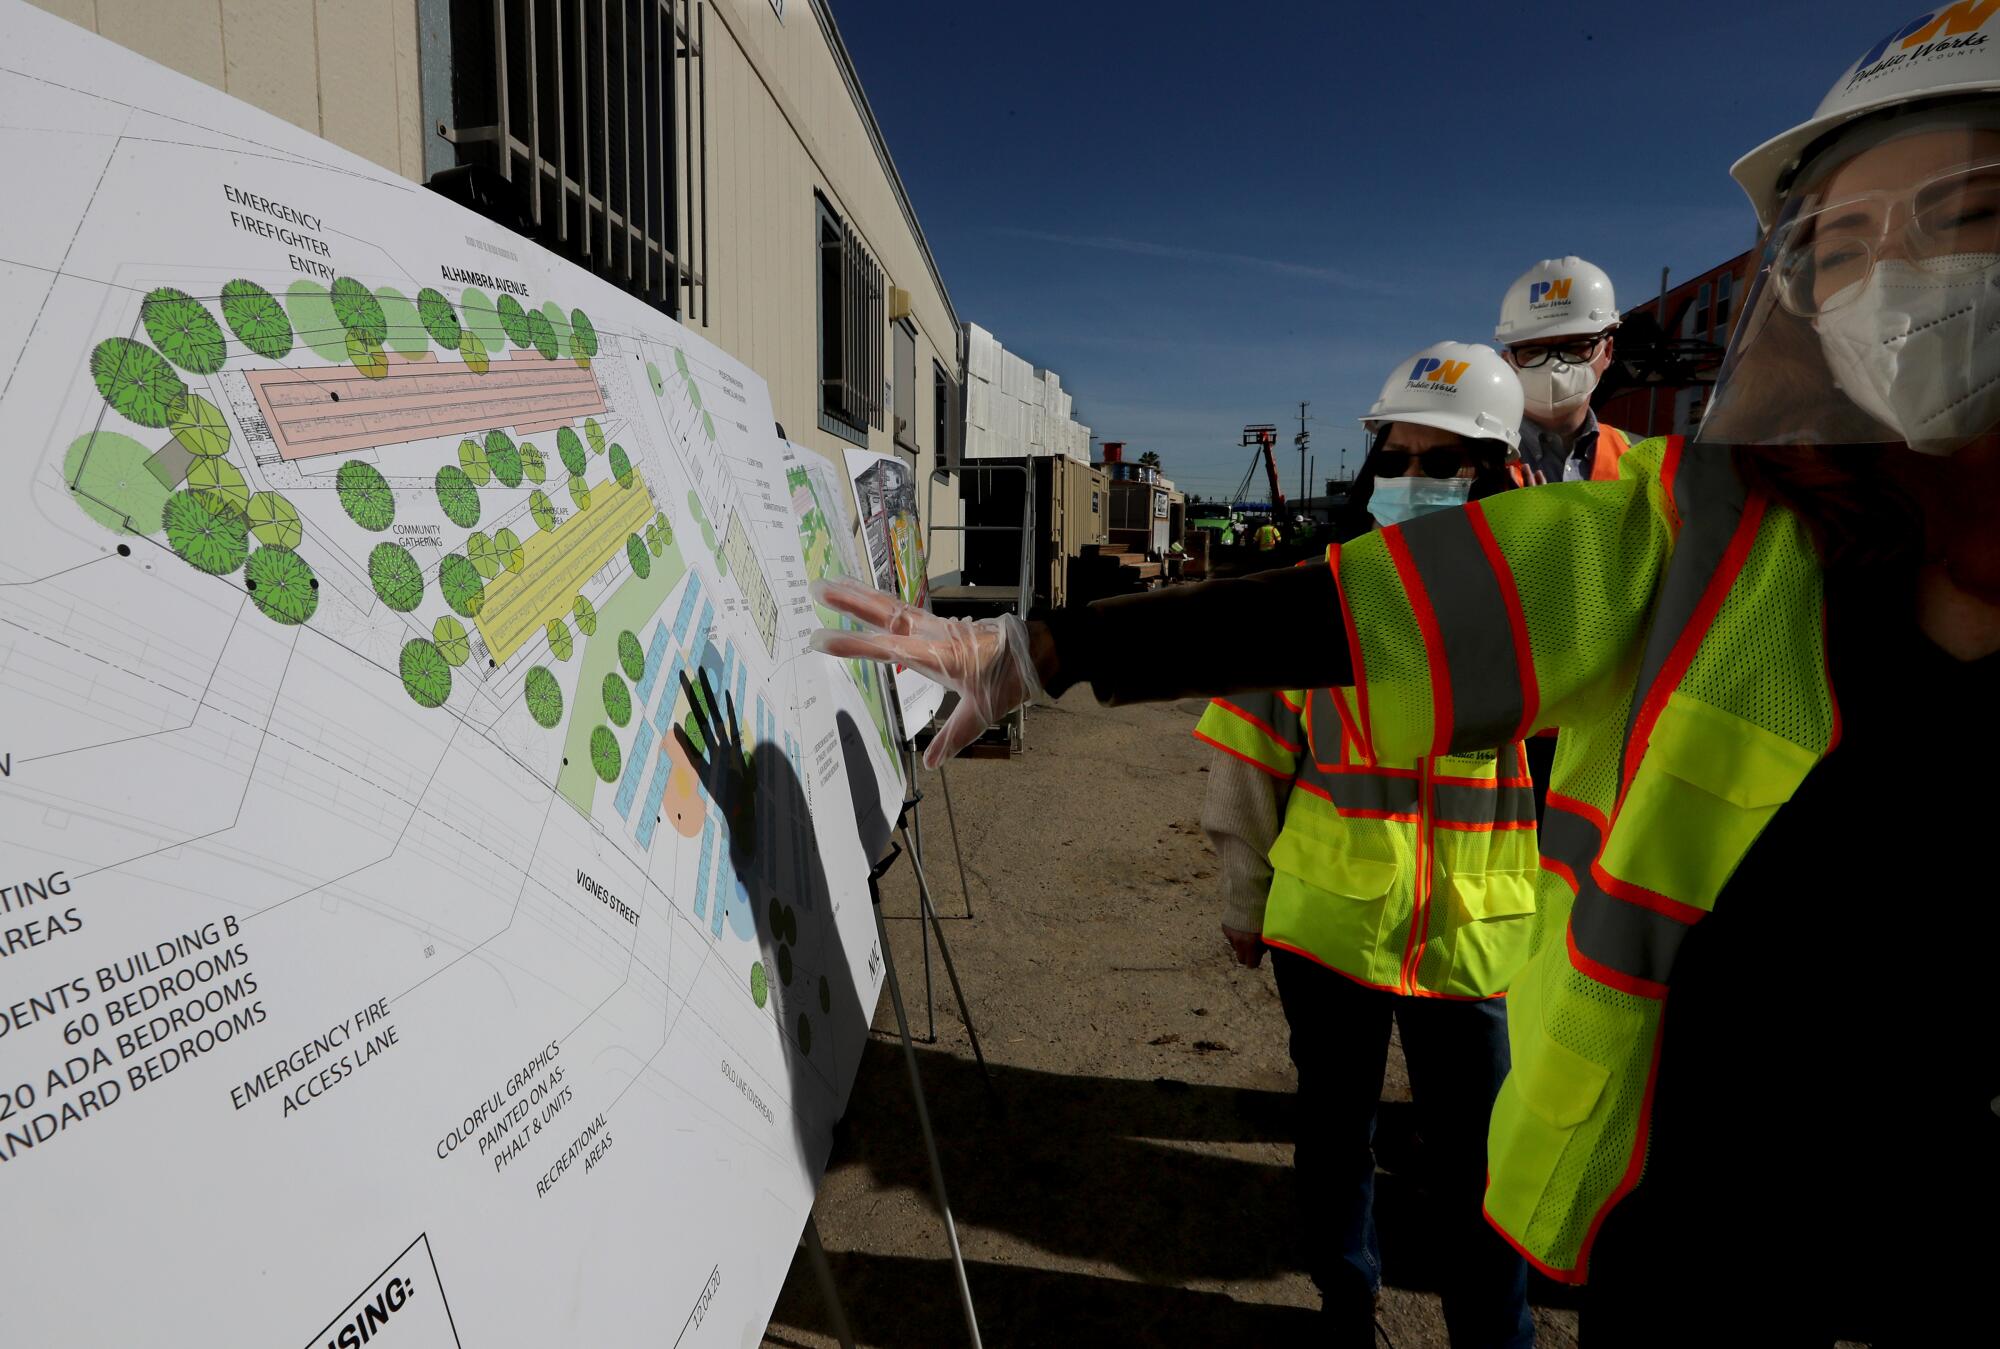 L.A. County officials and contractors look at plans of the homeless housing project.